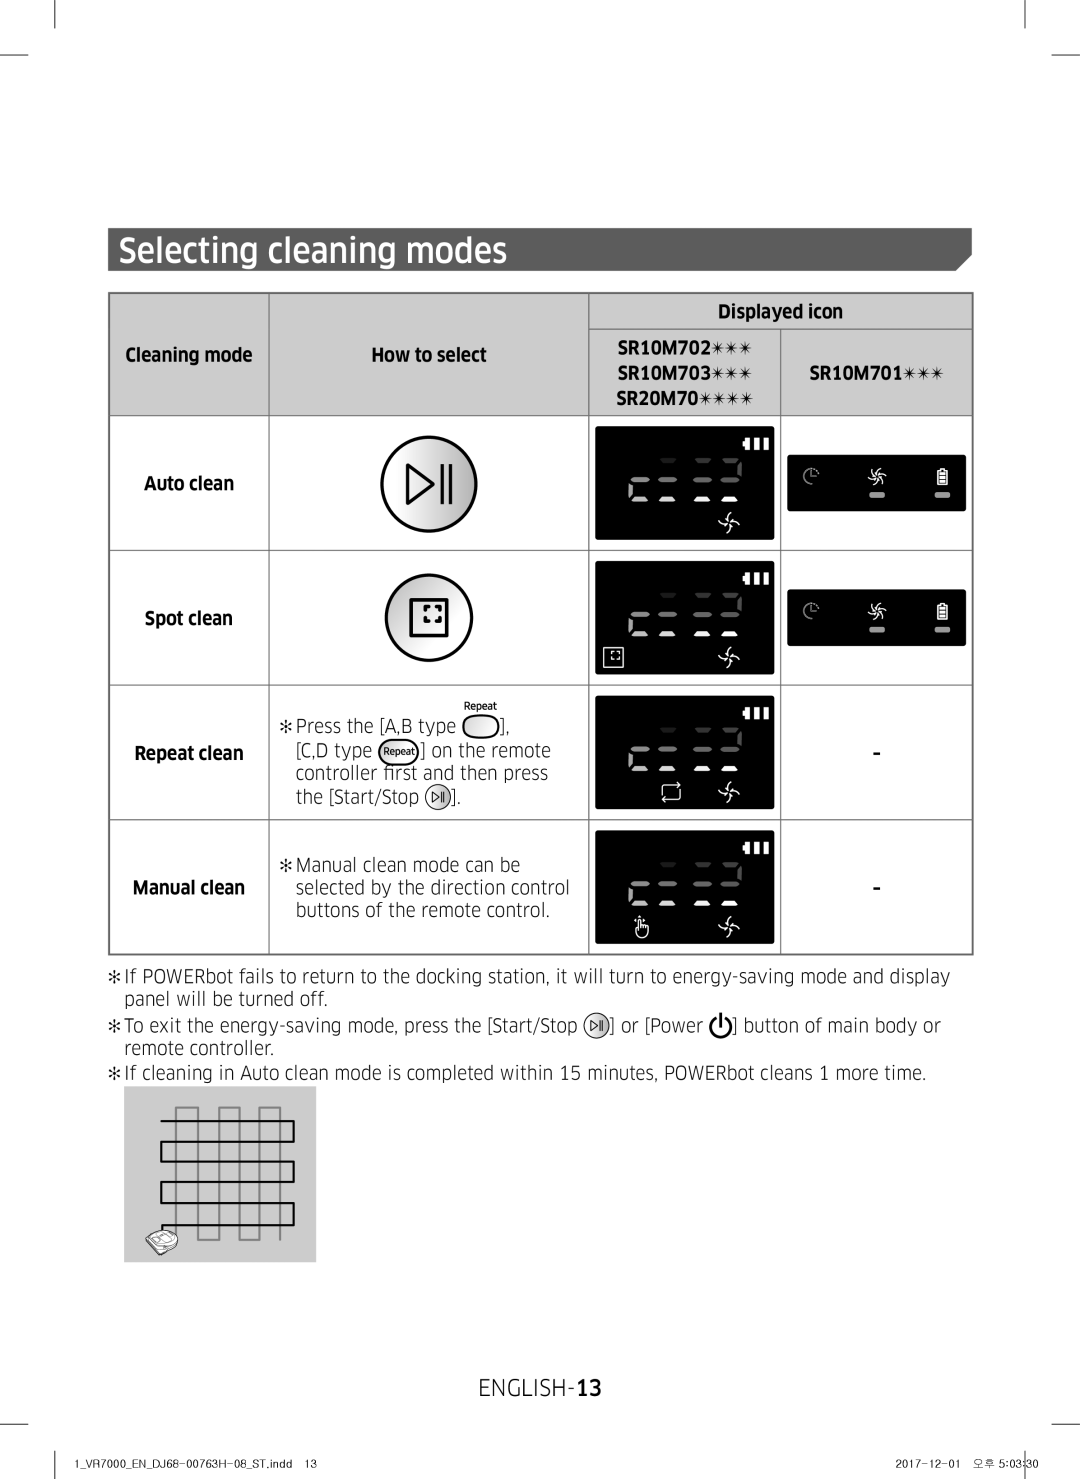 Samsung VR10M7020UW/ML, VR10M7030WG/ST, VR10M7020UW/TW manual Selecting cleaning modes 